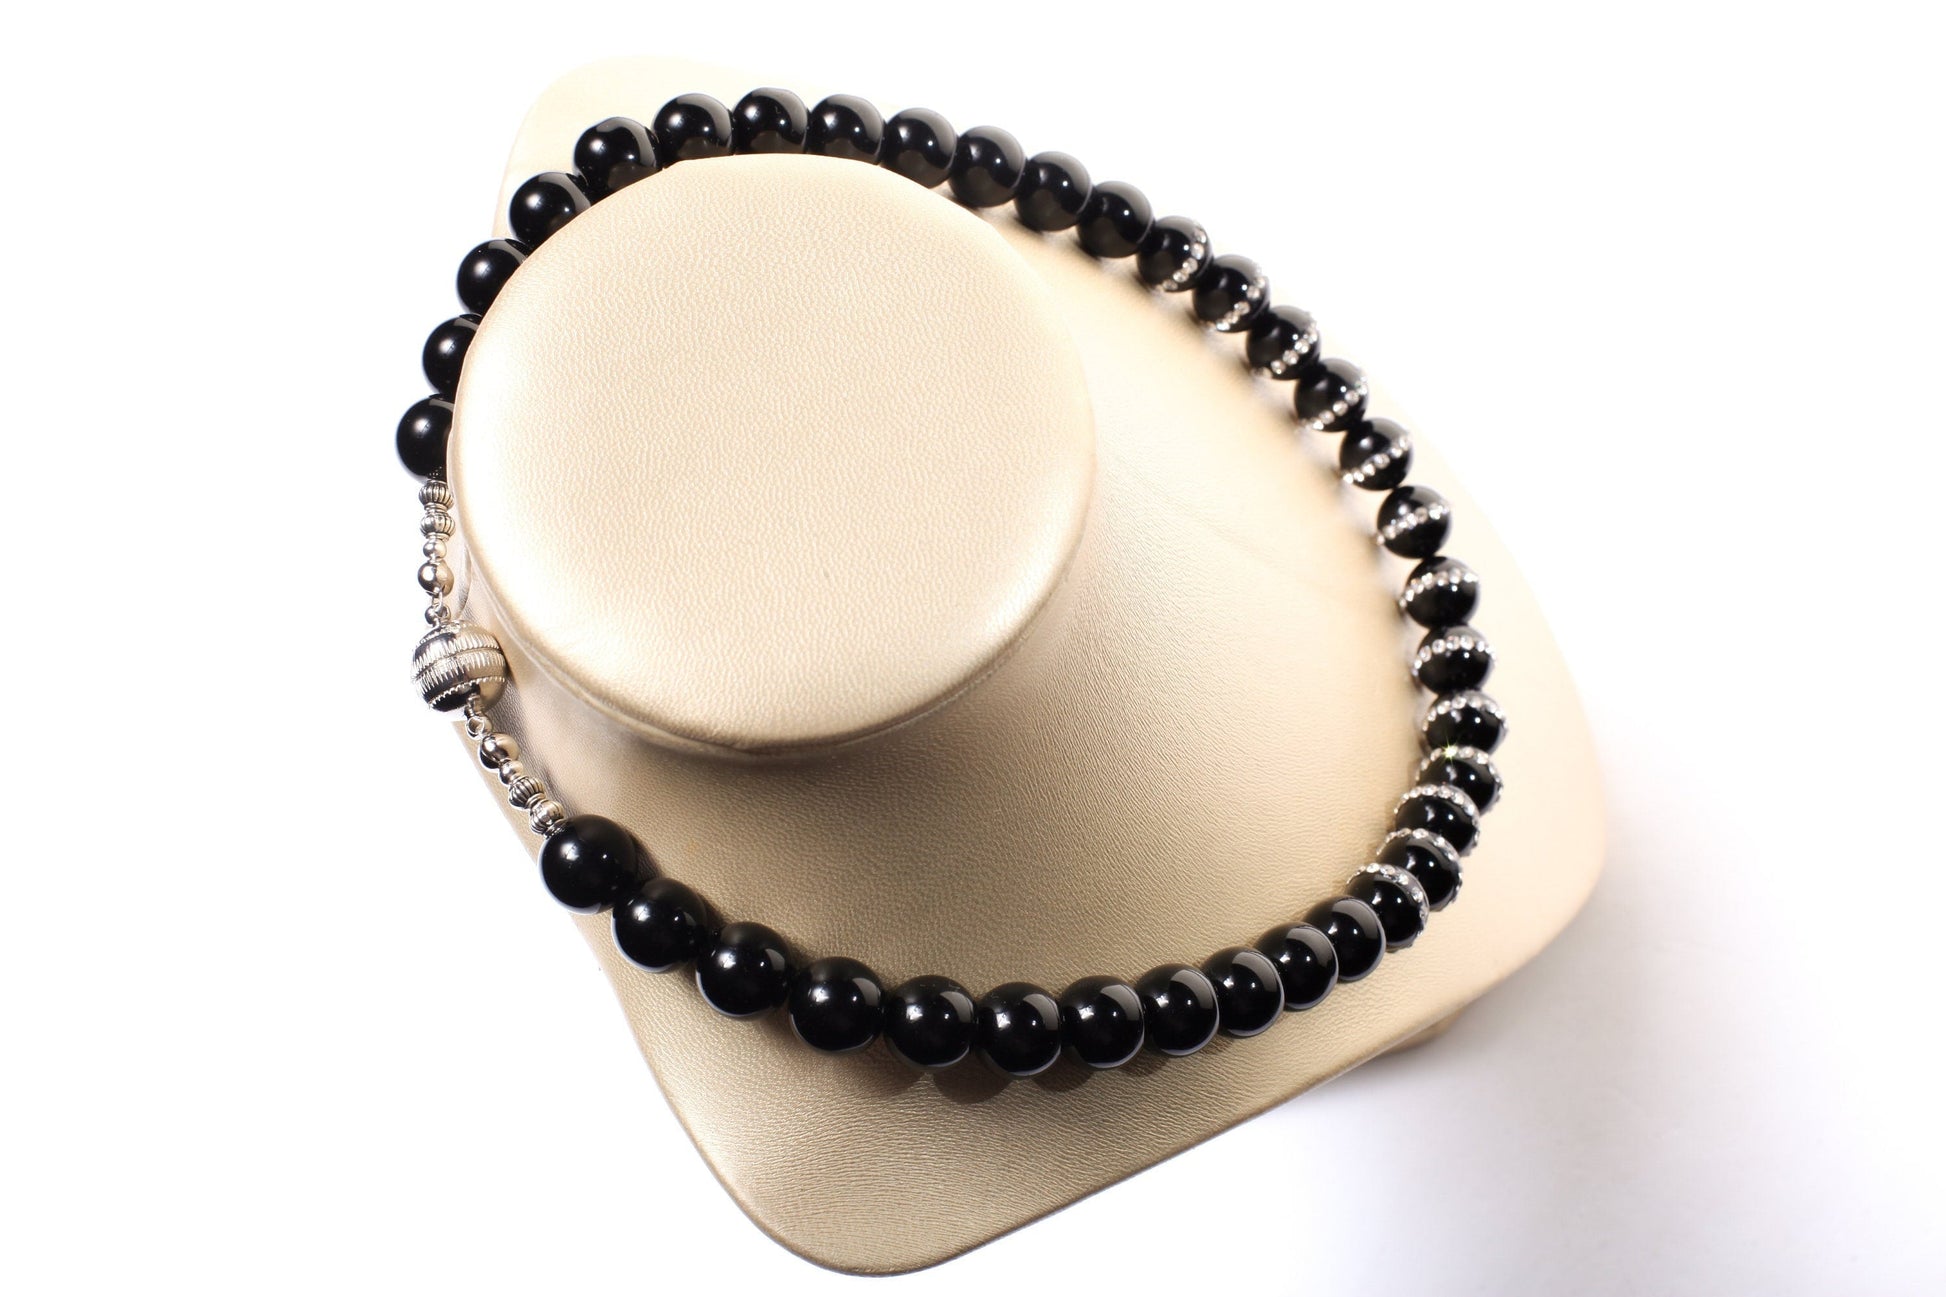 Black Onyx with 12mm Rhinestone Inlaid Onyx Round Beads Necklace with Magnetic Ball Clasp